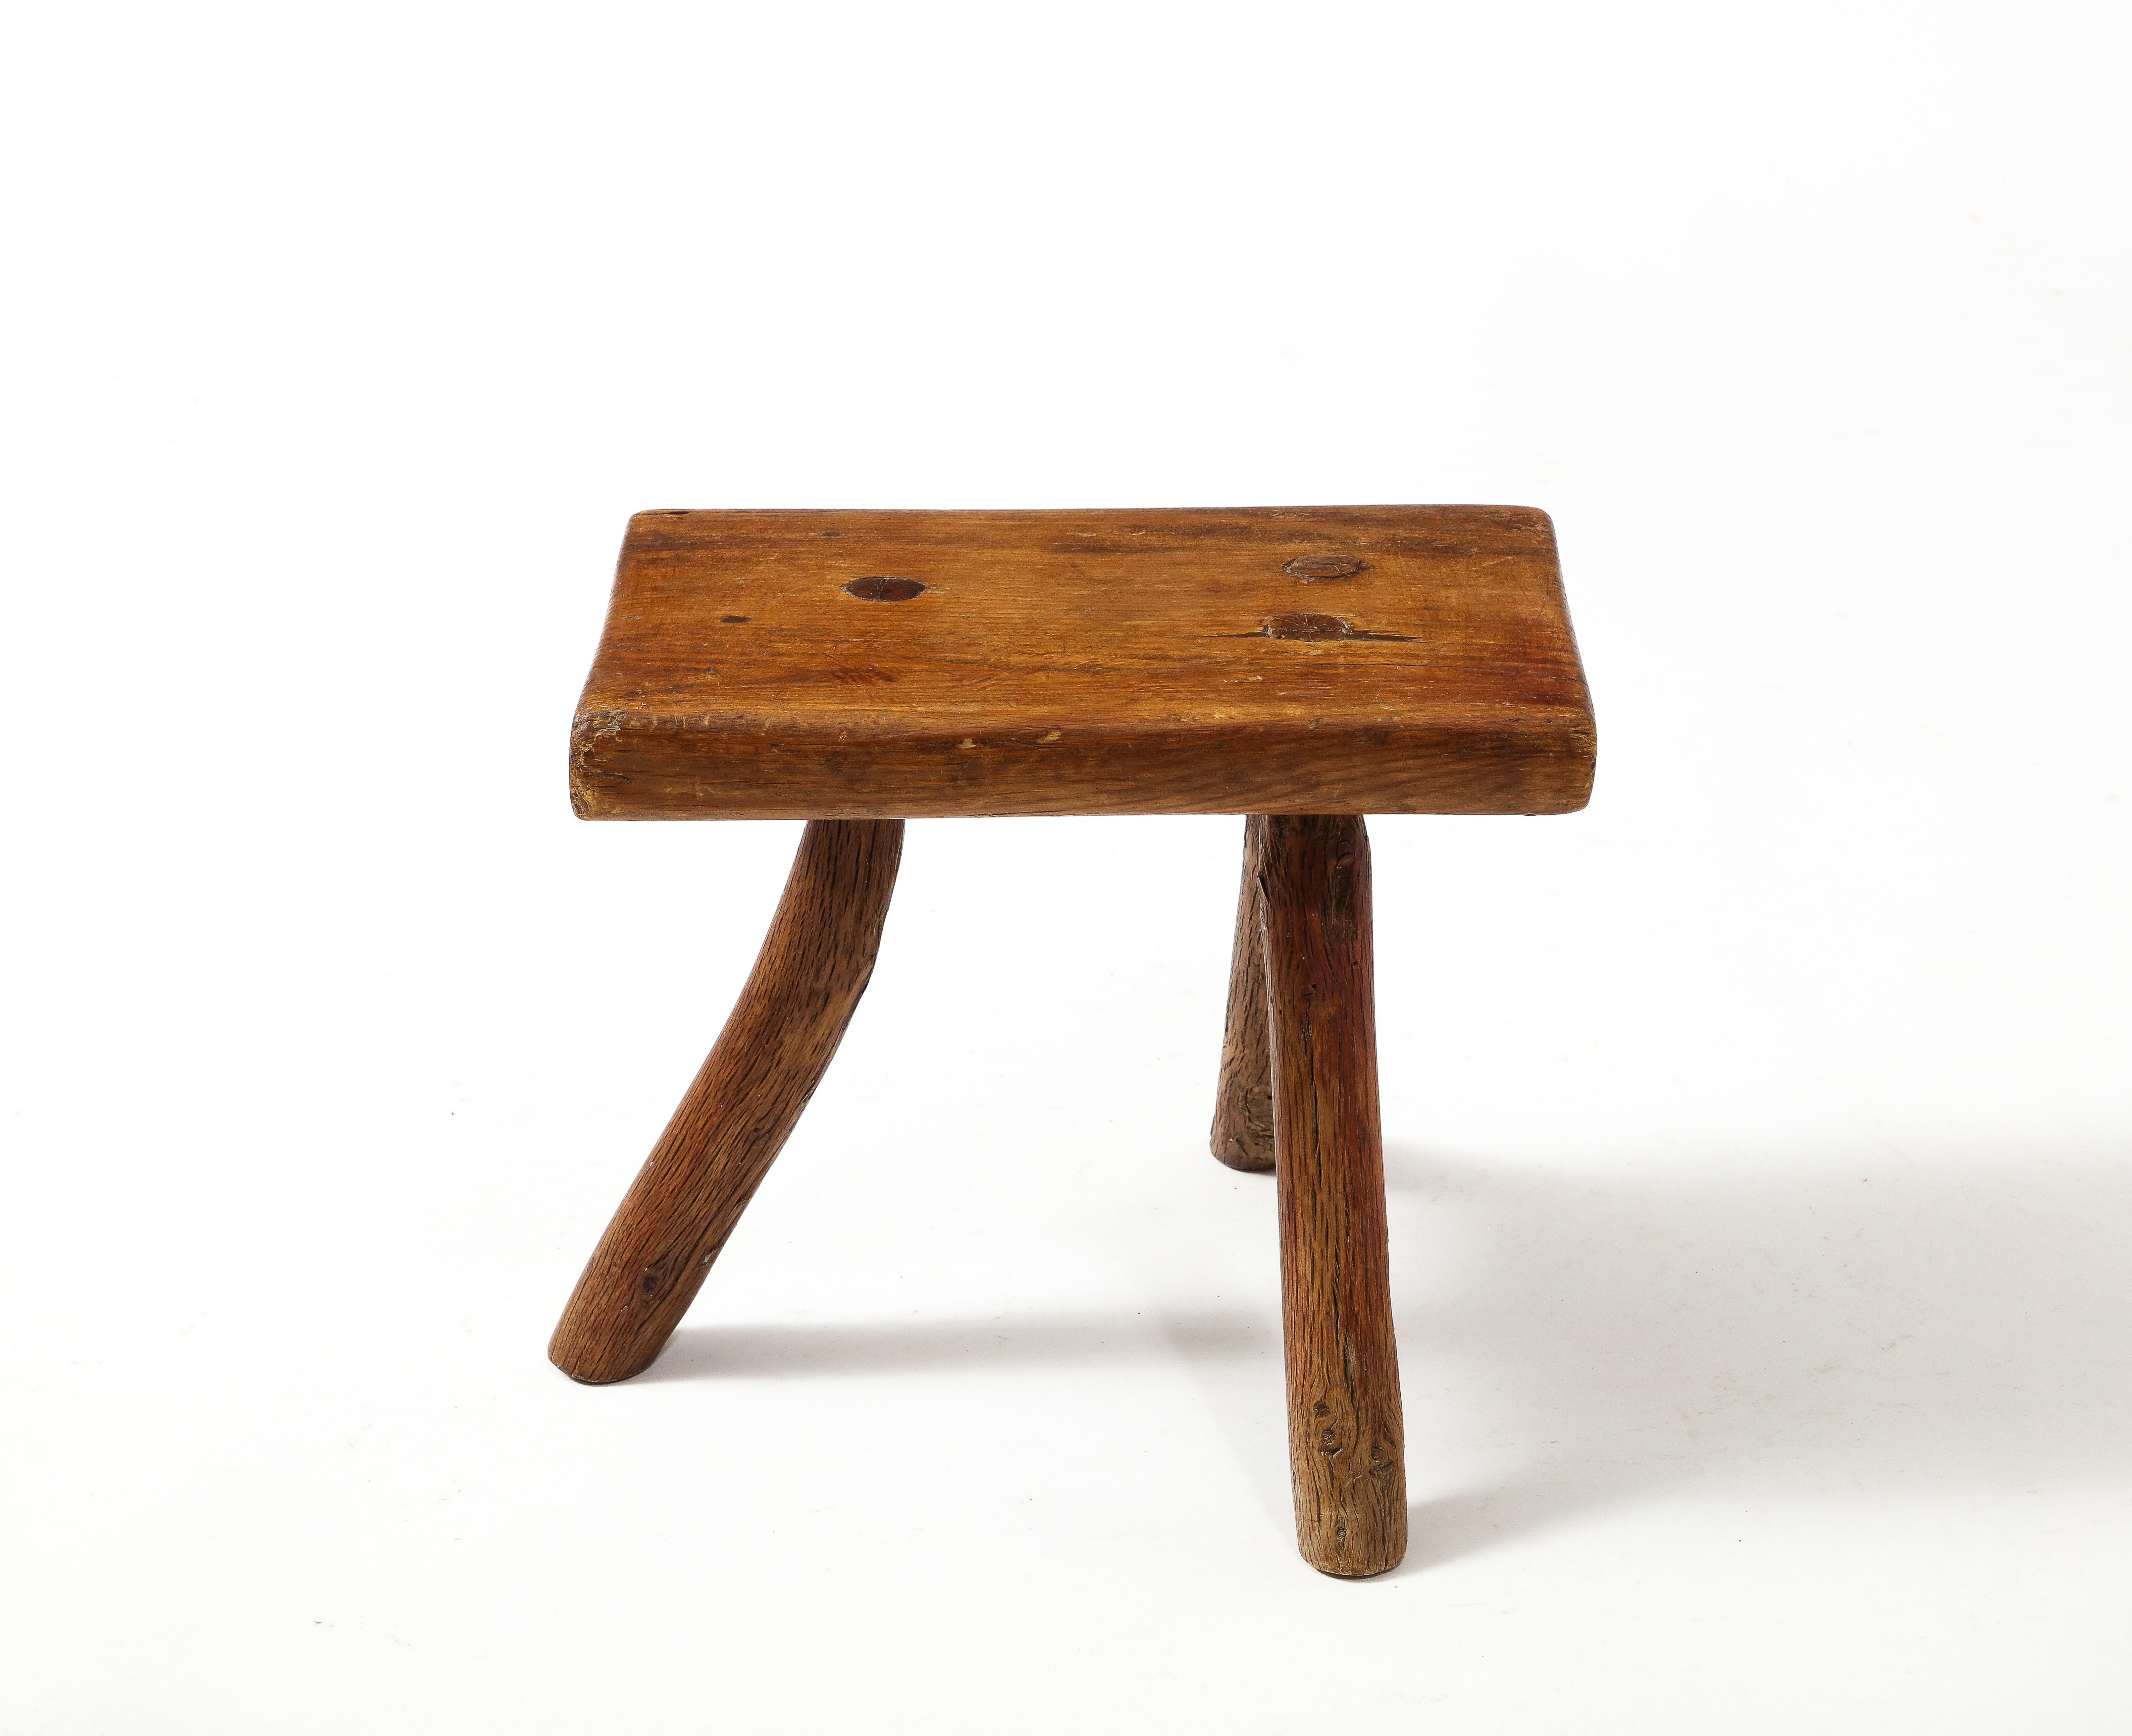 Rustic farm stool or table in solid ash.